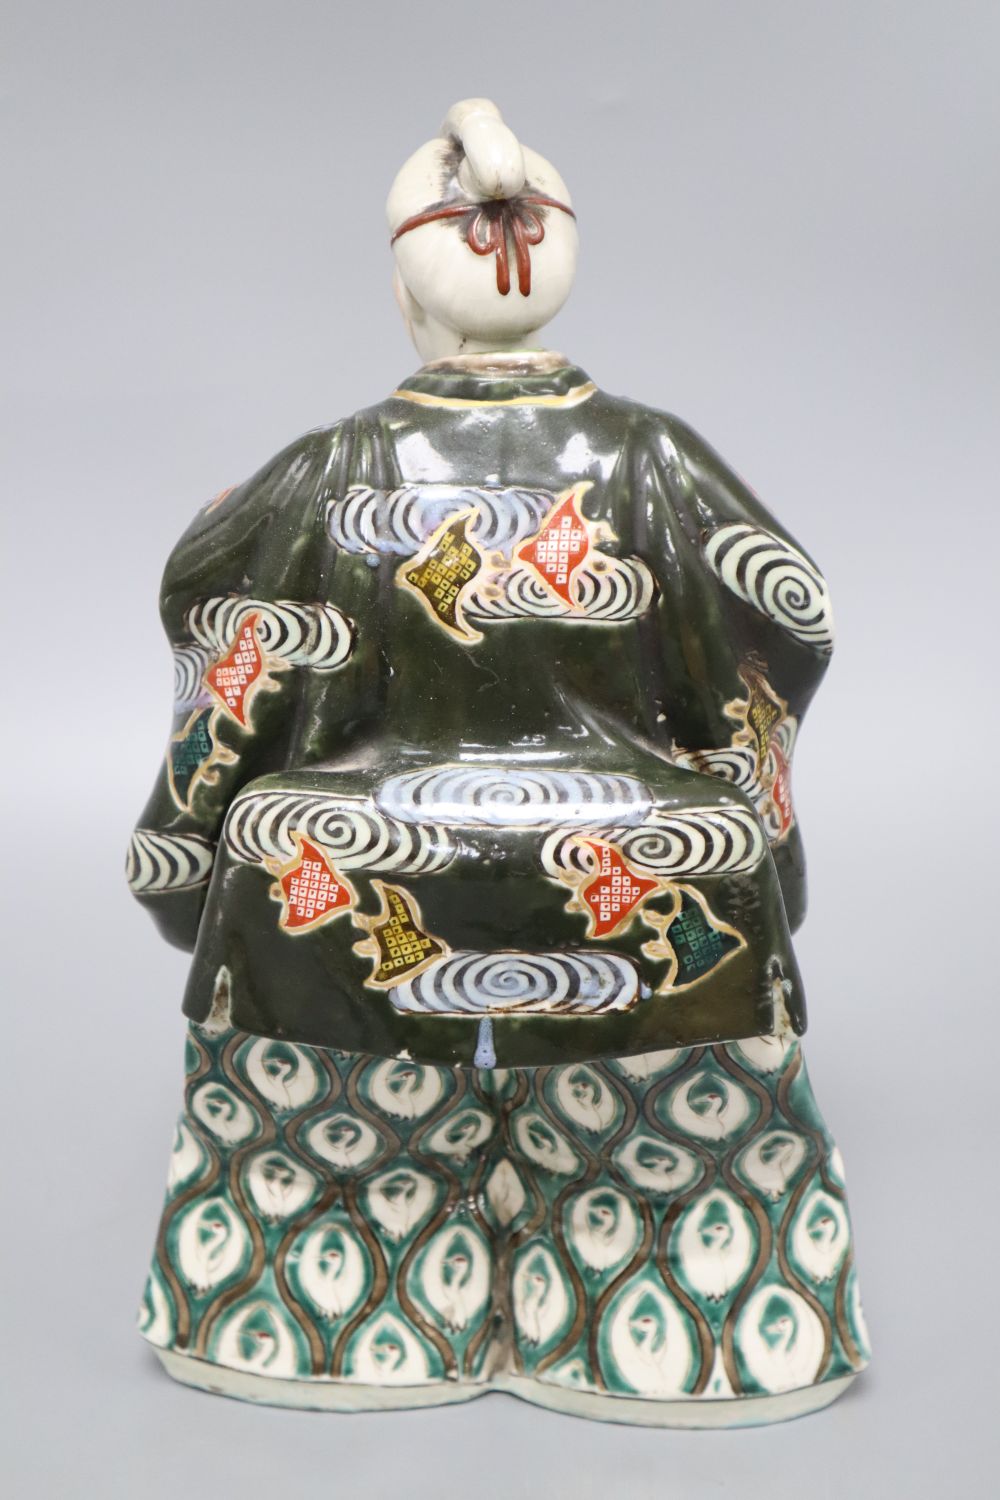 A Japanese ceramic model of a Samurai and a Chinese enamelled ceramic figure of a Buddha, tallest 31.5cm